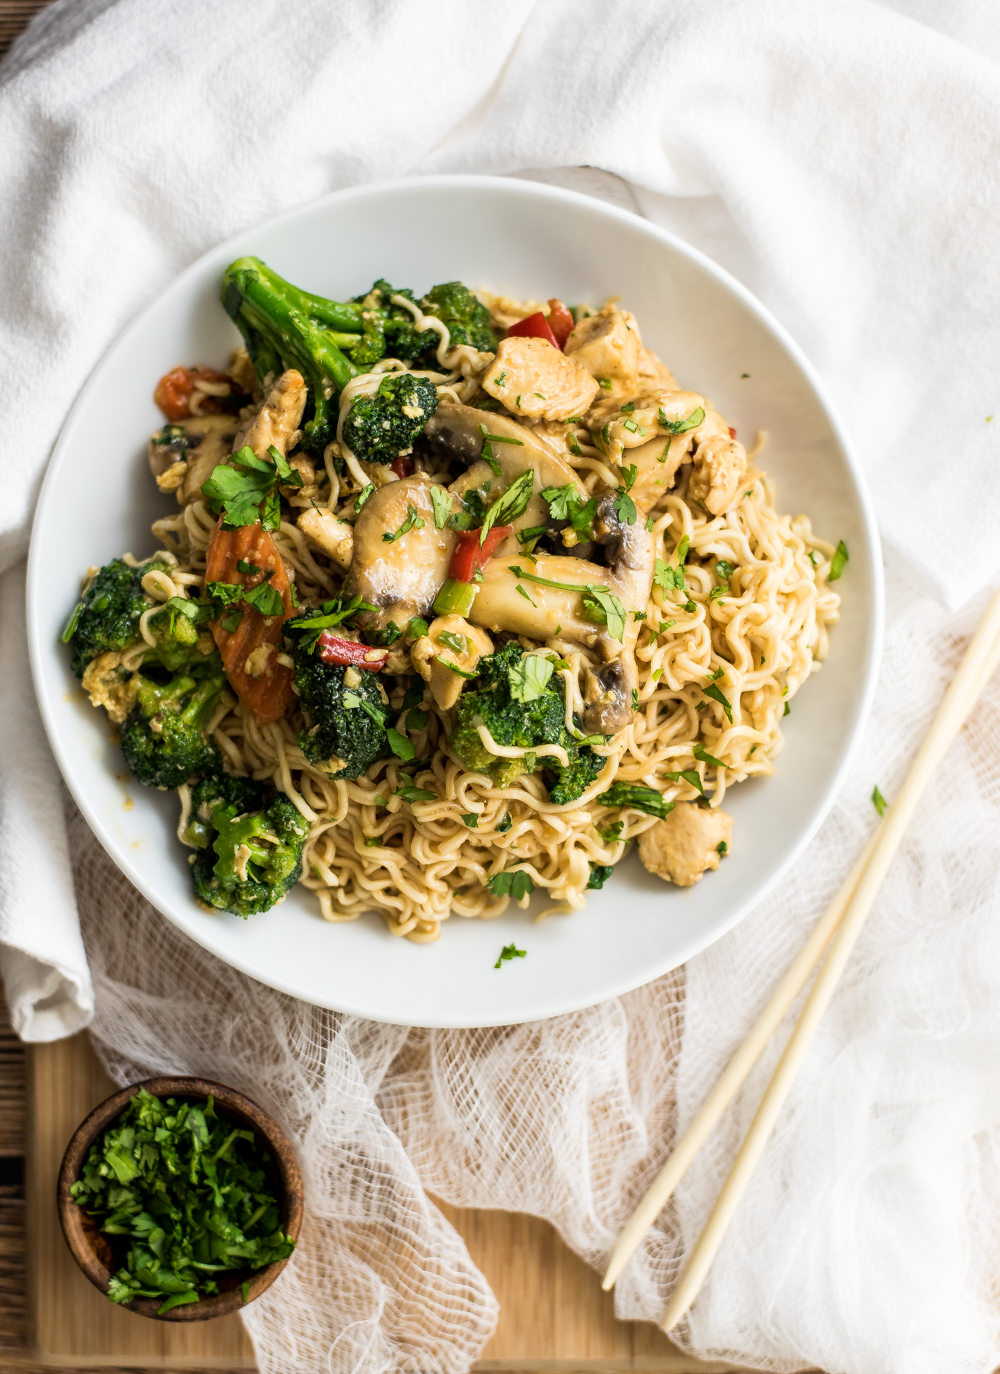 30-Minute Chicken Stir Fry Ramen is the perfect family-friendly weeknight meal. It is on the table in 30 minutes and is exploding with flavor thanks to House of Tsang's General Tso Stir-Fry Sauce!